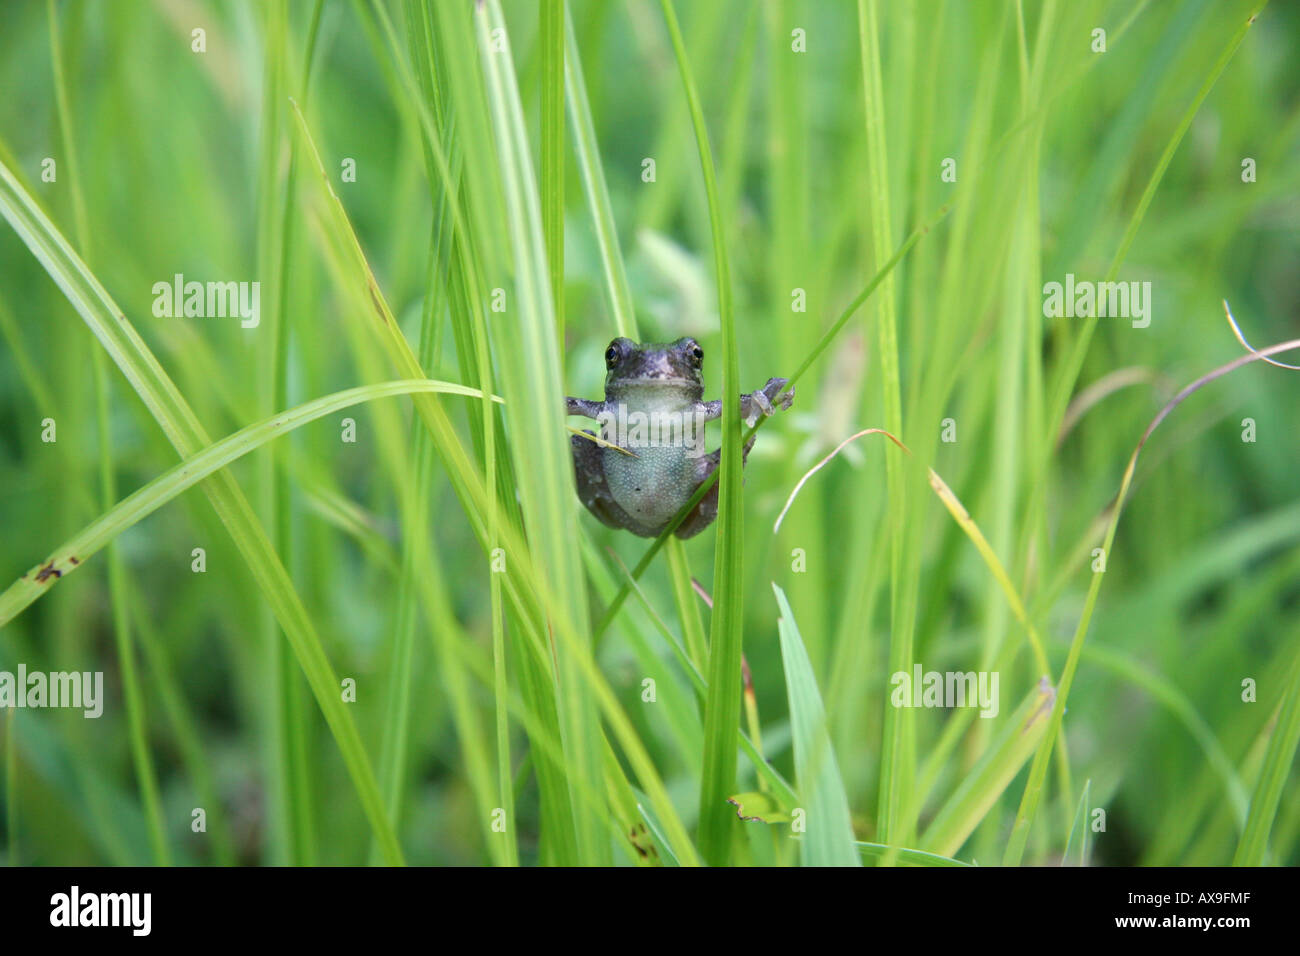 Brown and green tree frog in grass. Stock Photo